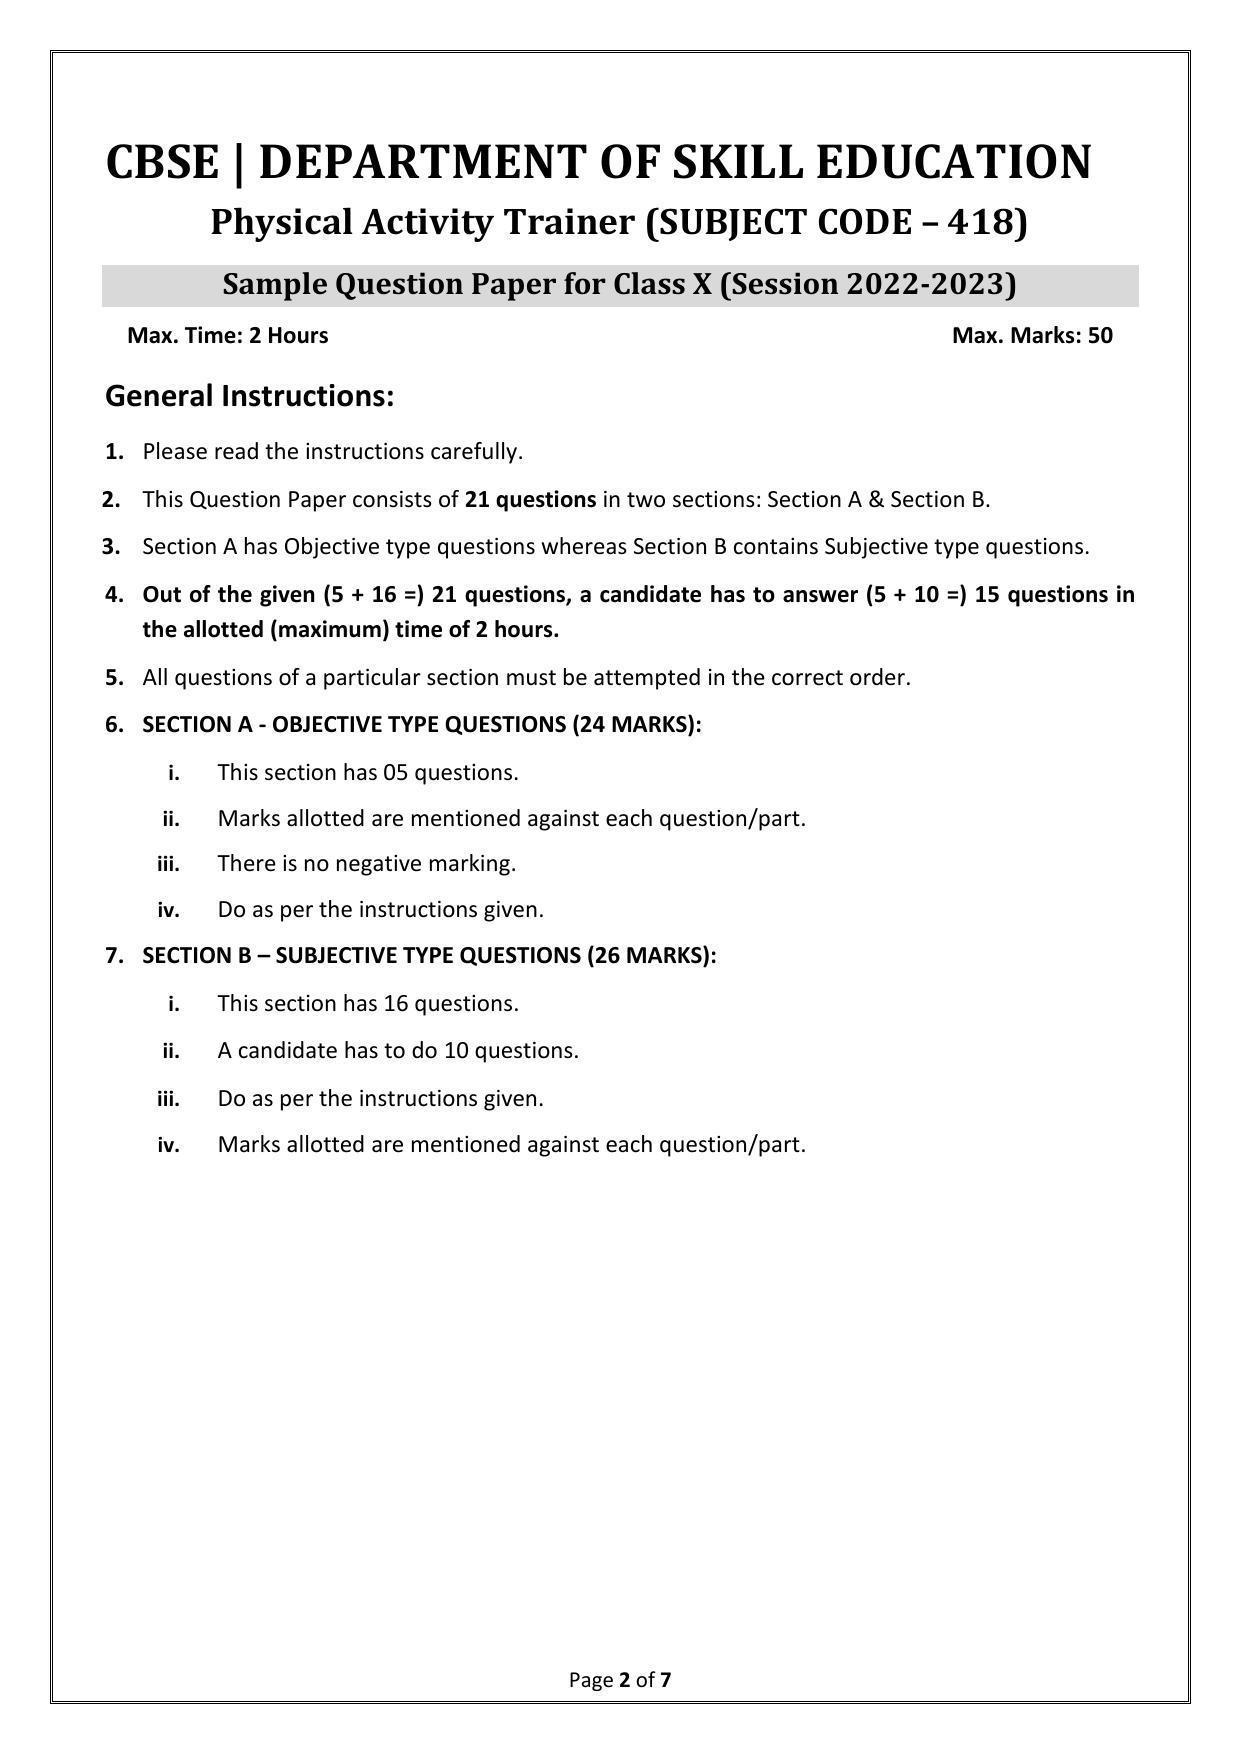 CBSE Class 10 (Skill Education) Physical Activity Trainer Sample Papers 2023 - Page 2